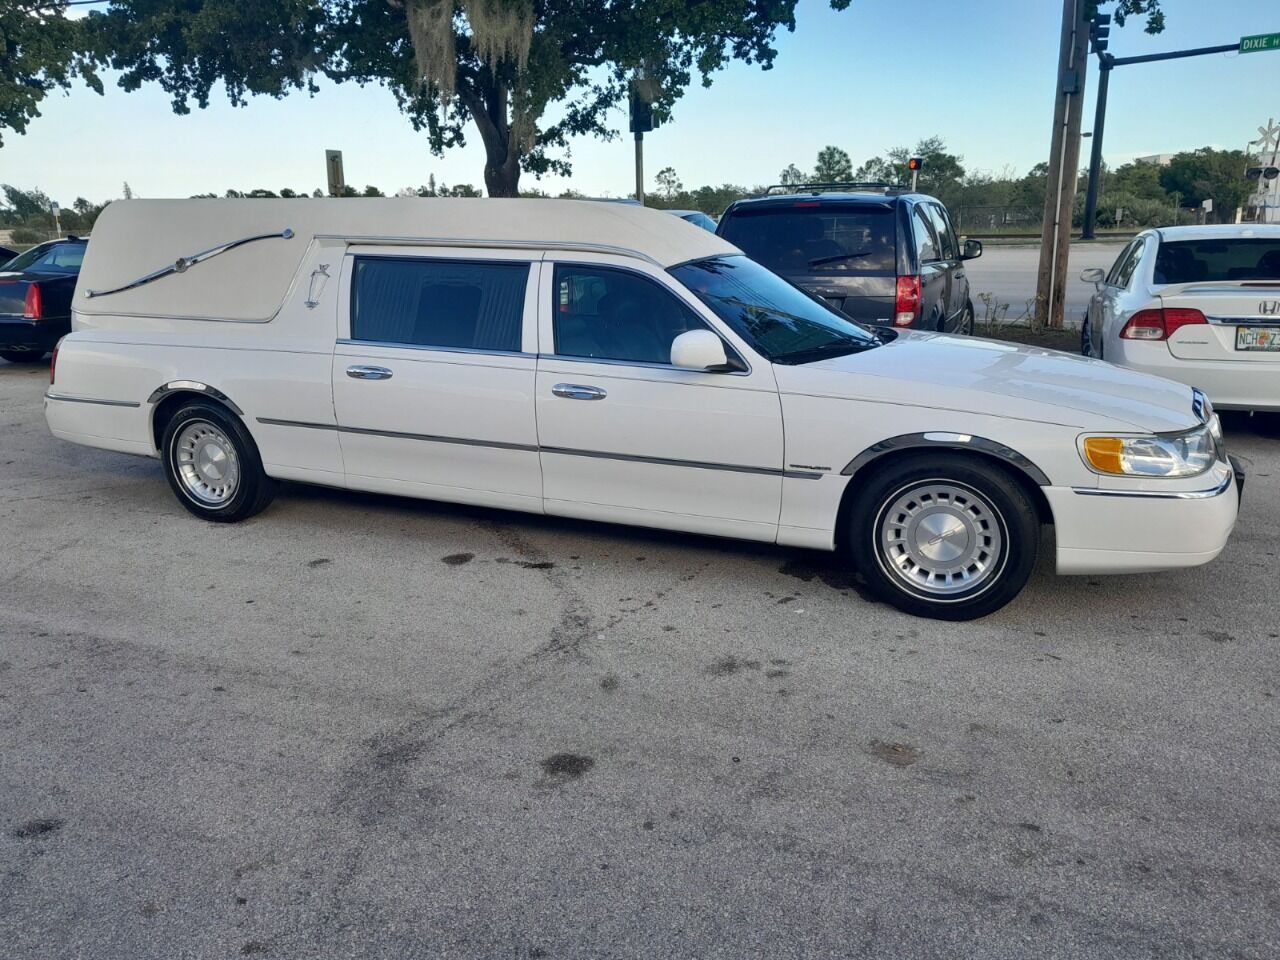 2001 Lincoln Town & Country Sedan - $8,950